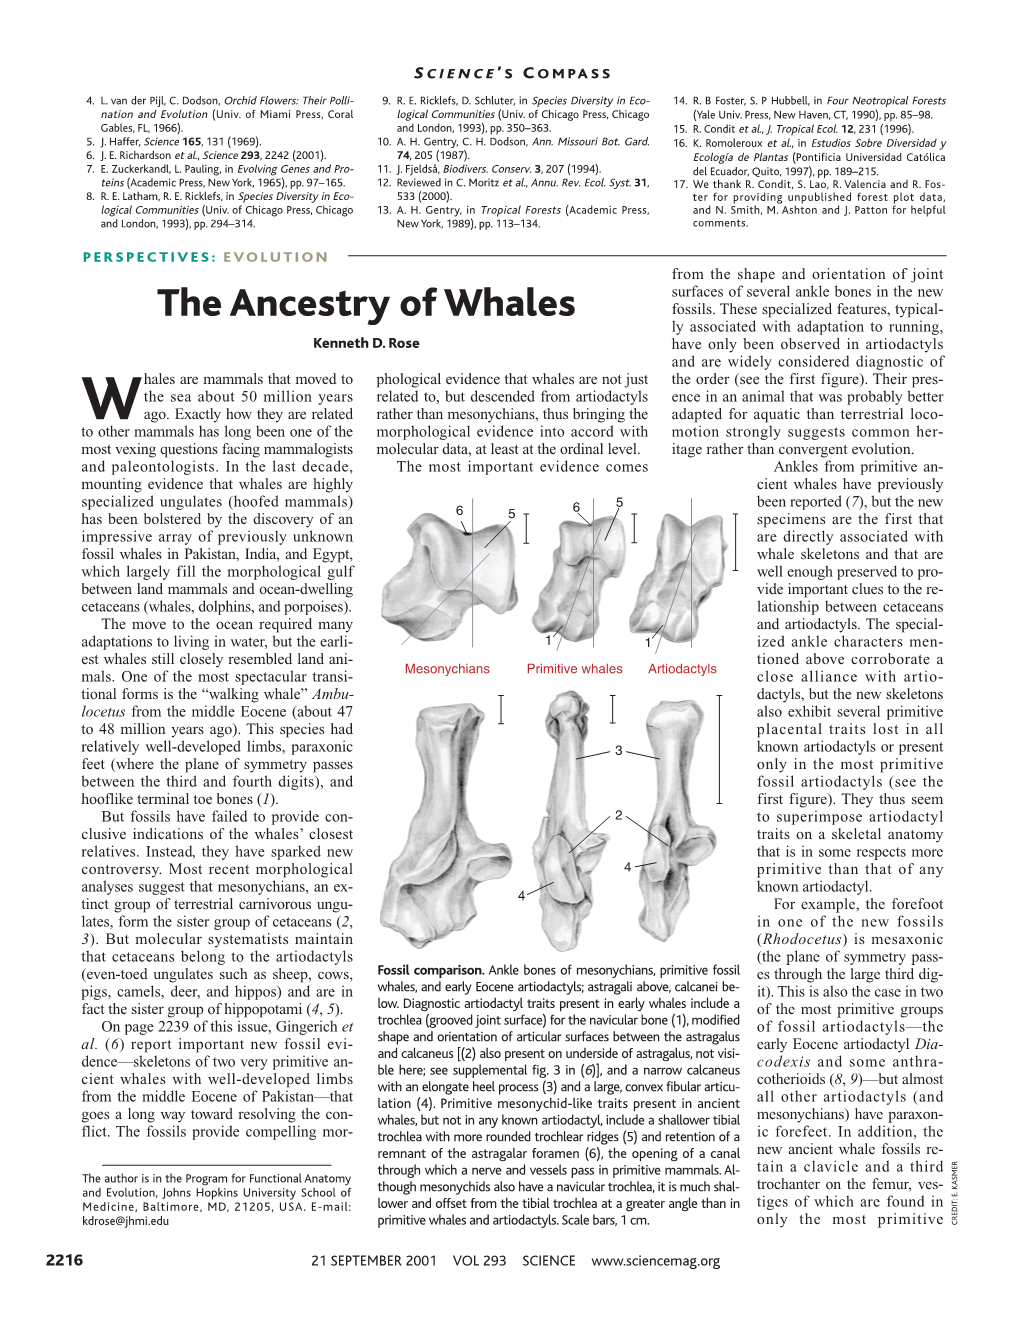 The Ancestry of Whales Fossils